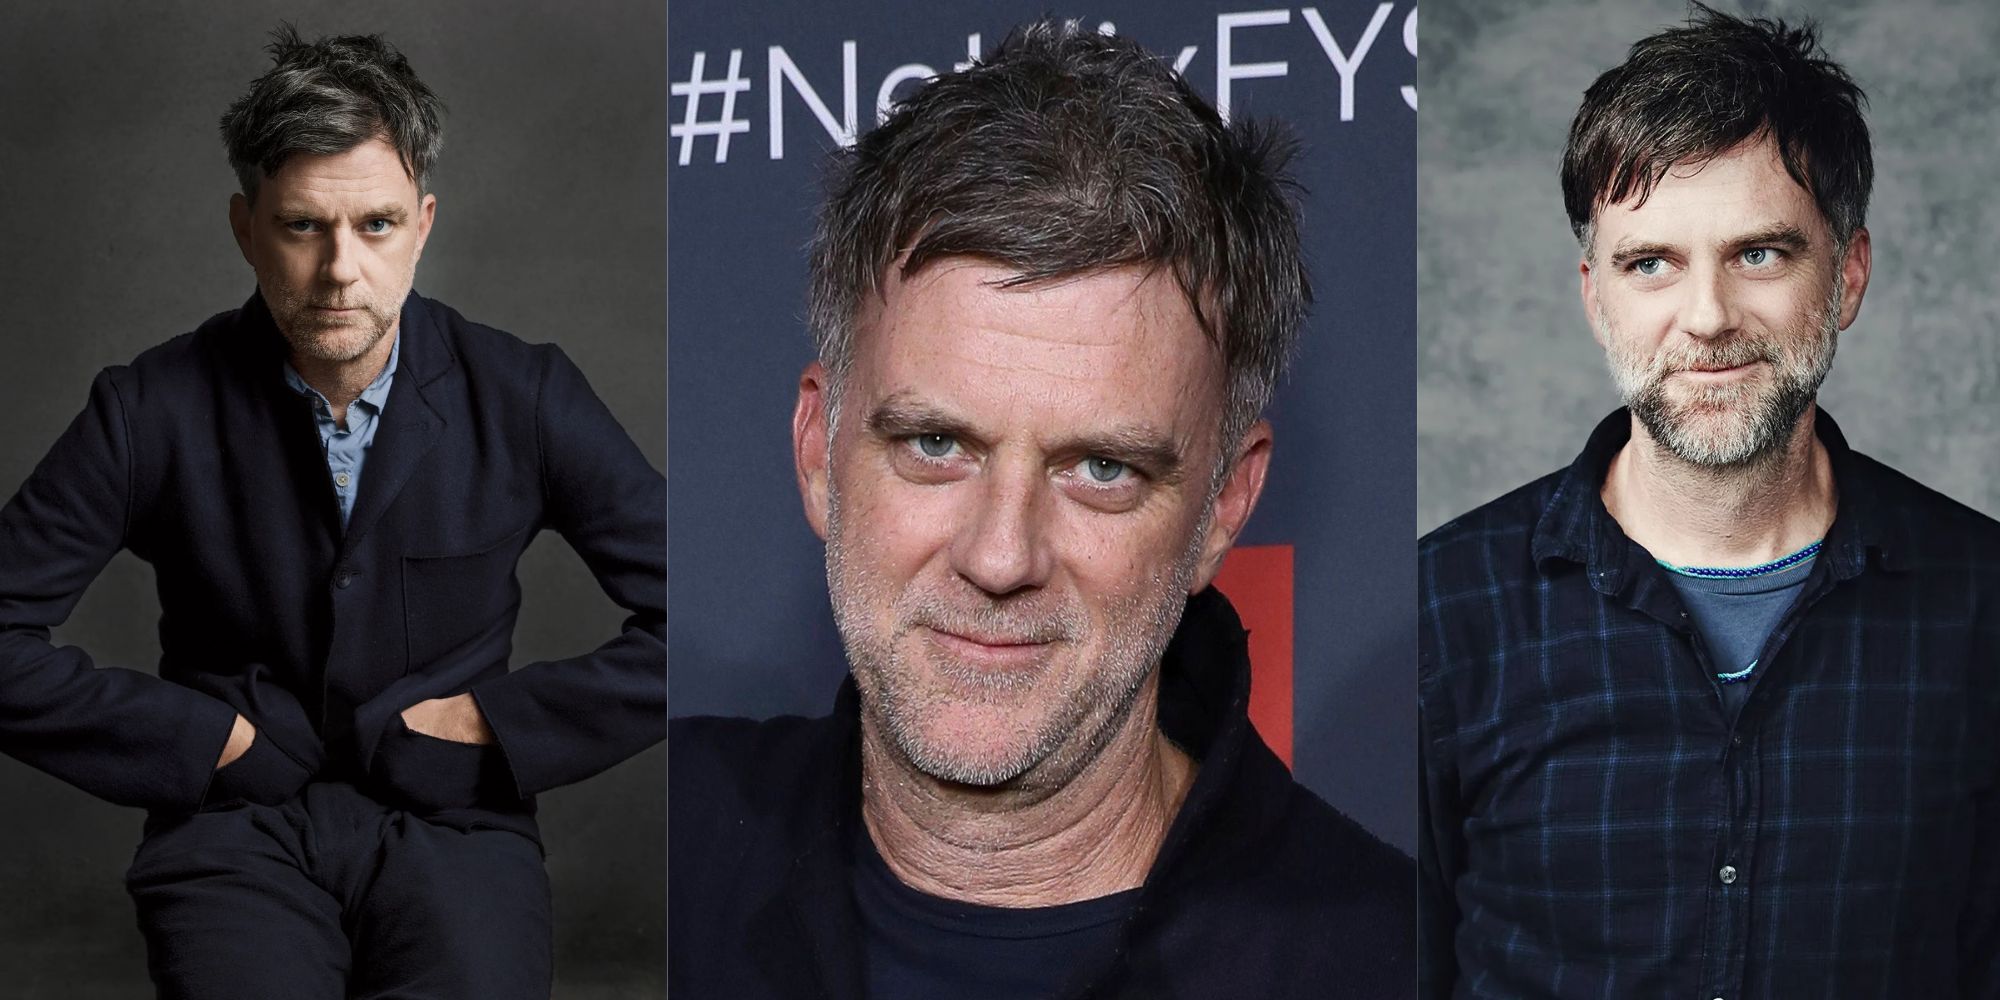 Who is Paul Thomas Anderson?